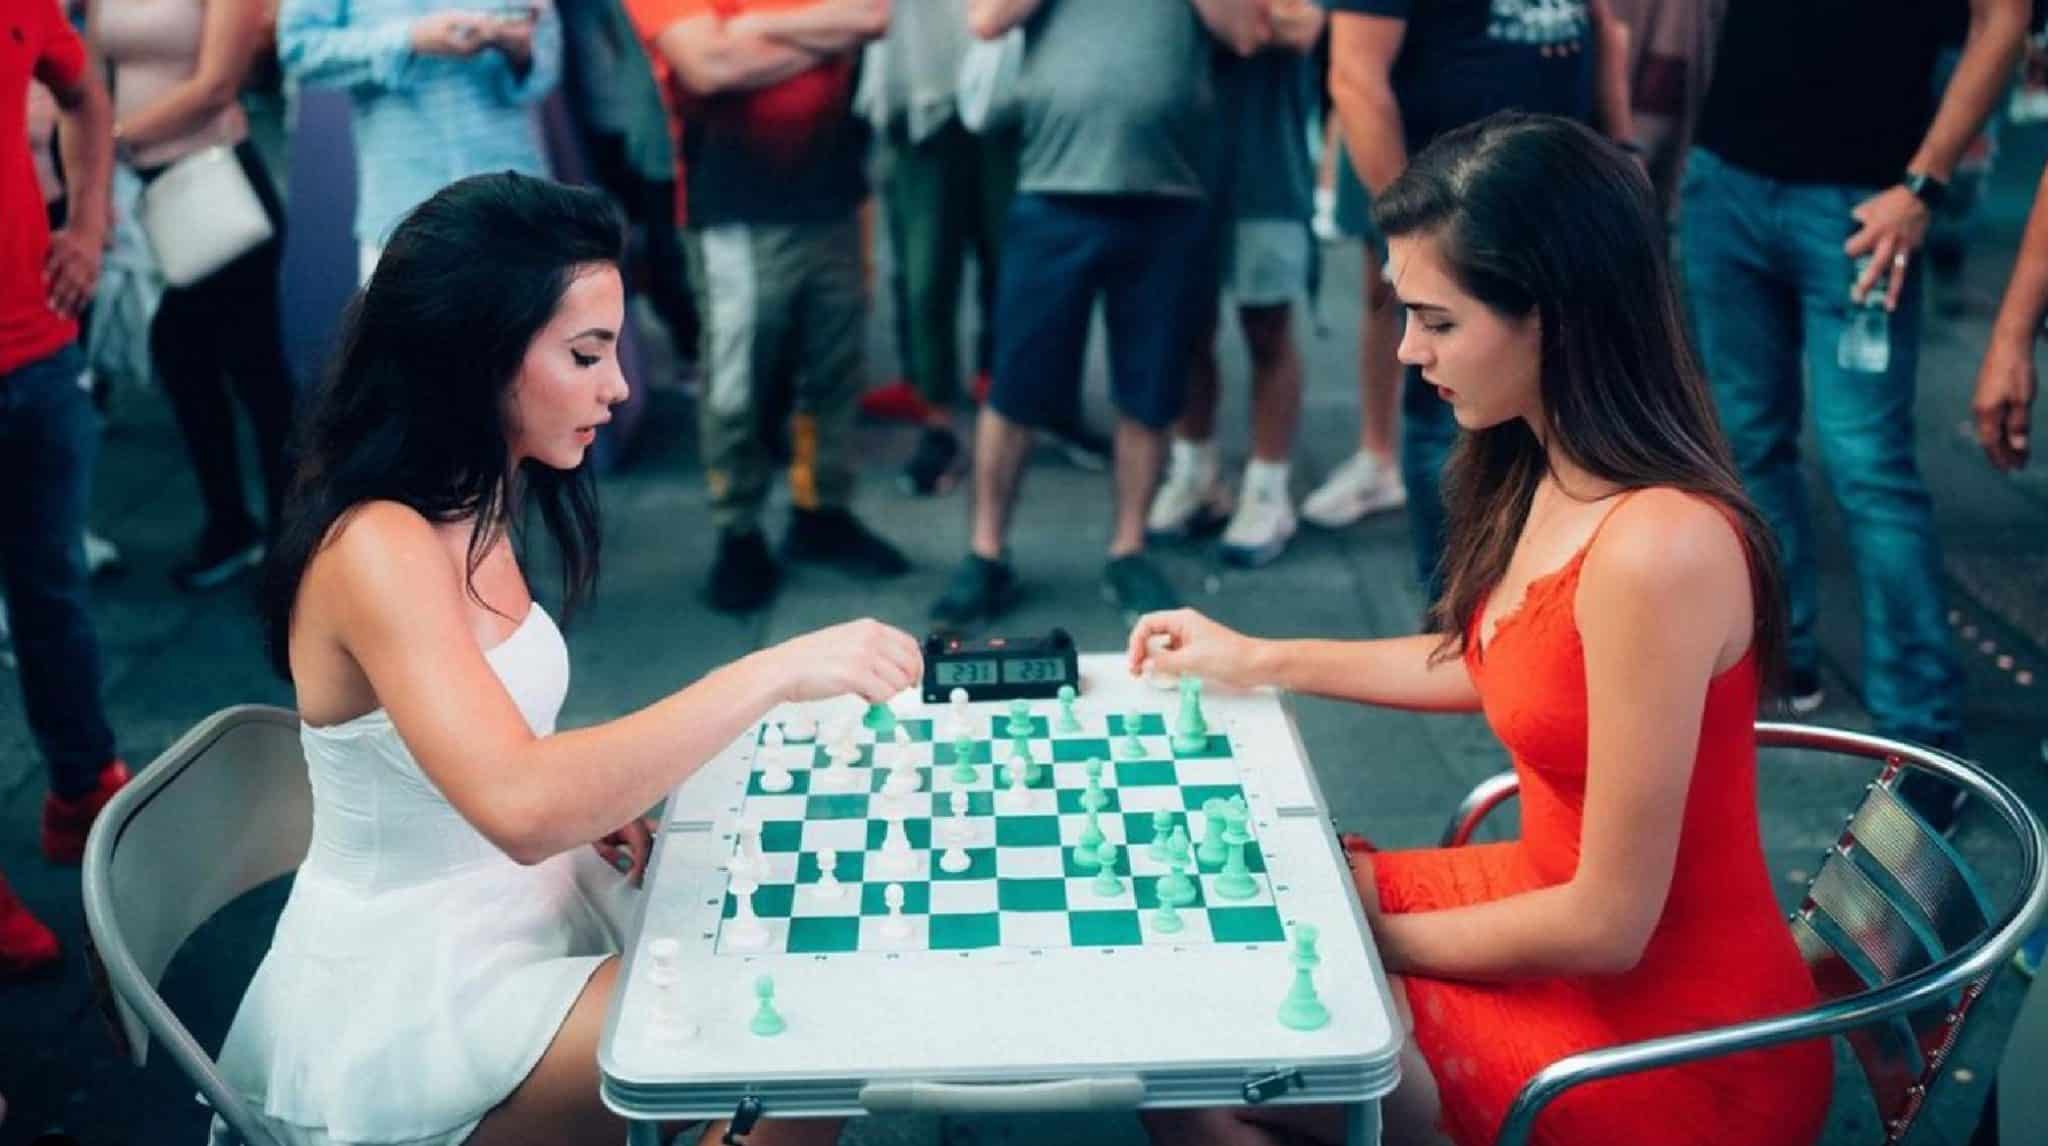 when Andrea is jealous #botez #chess #chesstok #Twitch #streamer  #siblings #sisters